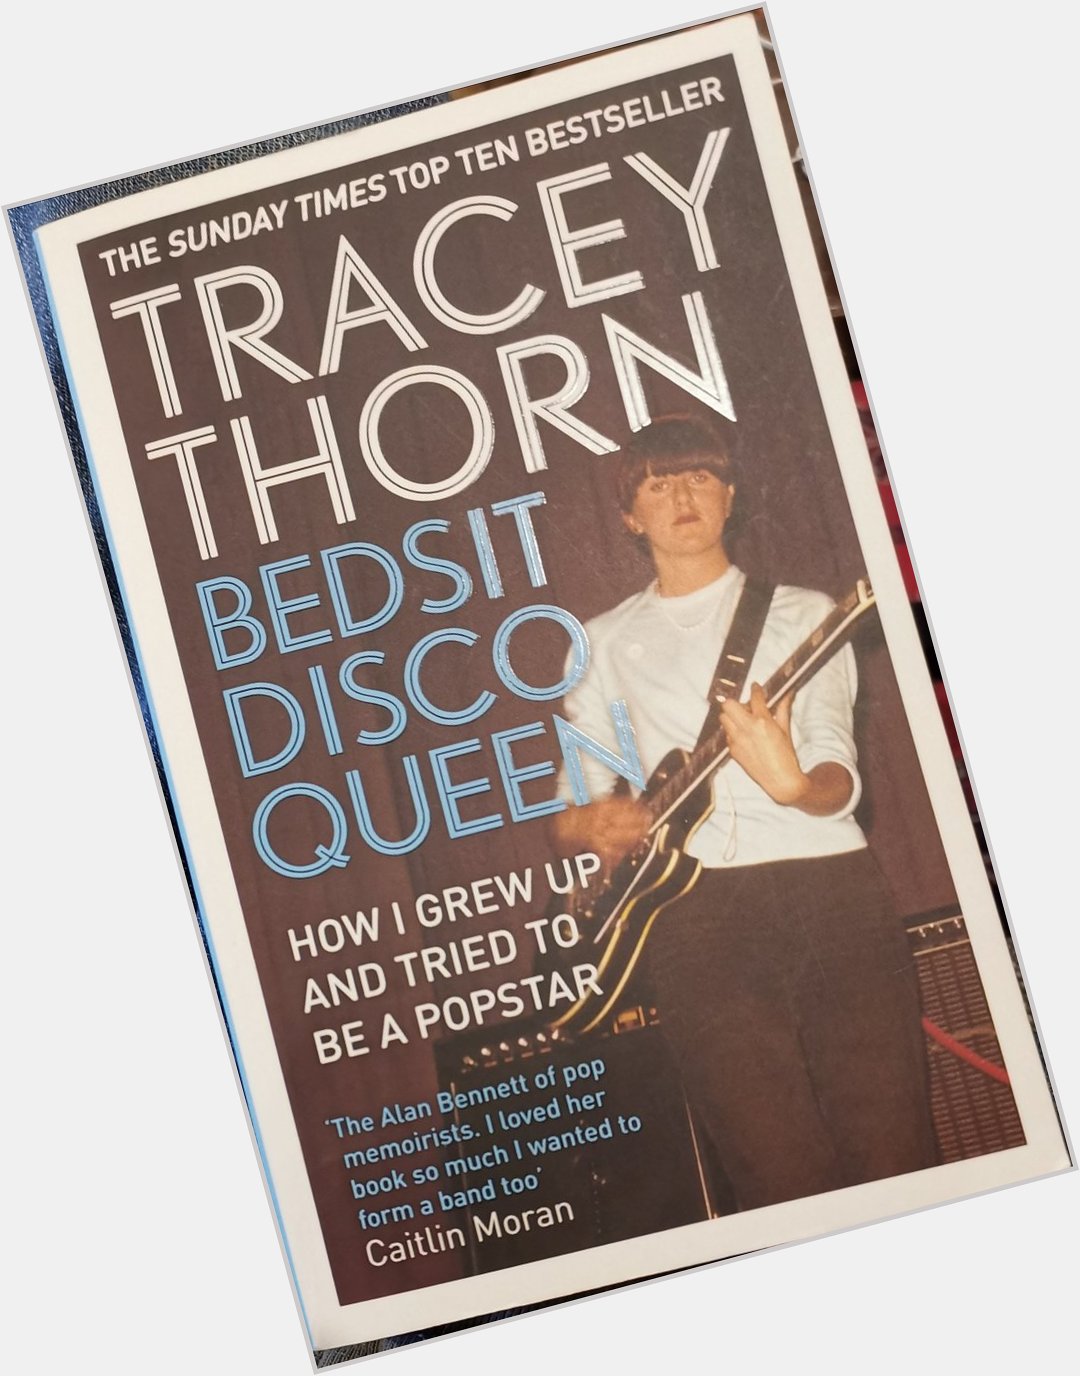   Happen to be reading this - a Disco Queen for sure! Happy birthday! 